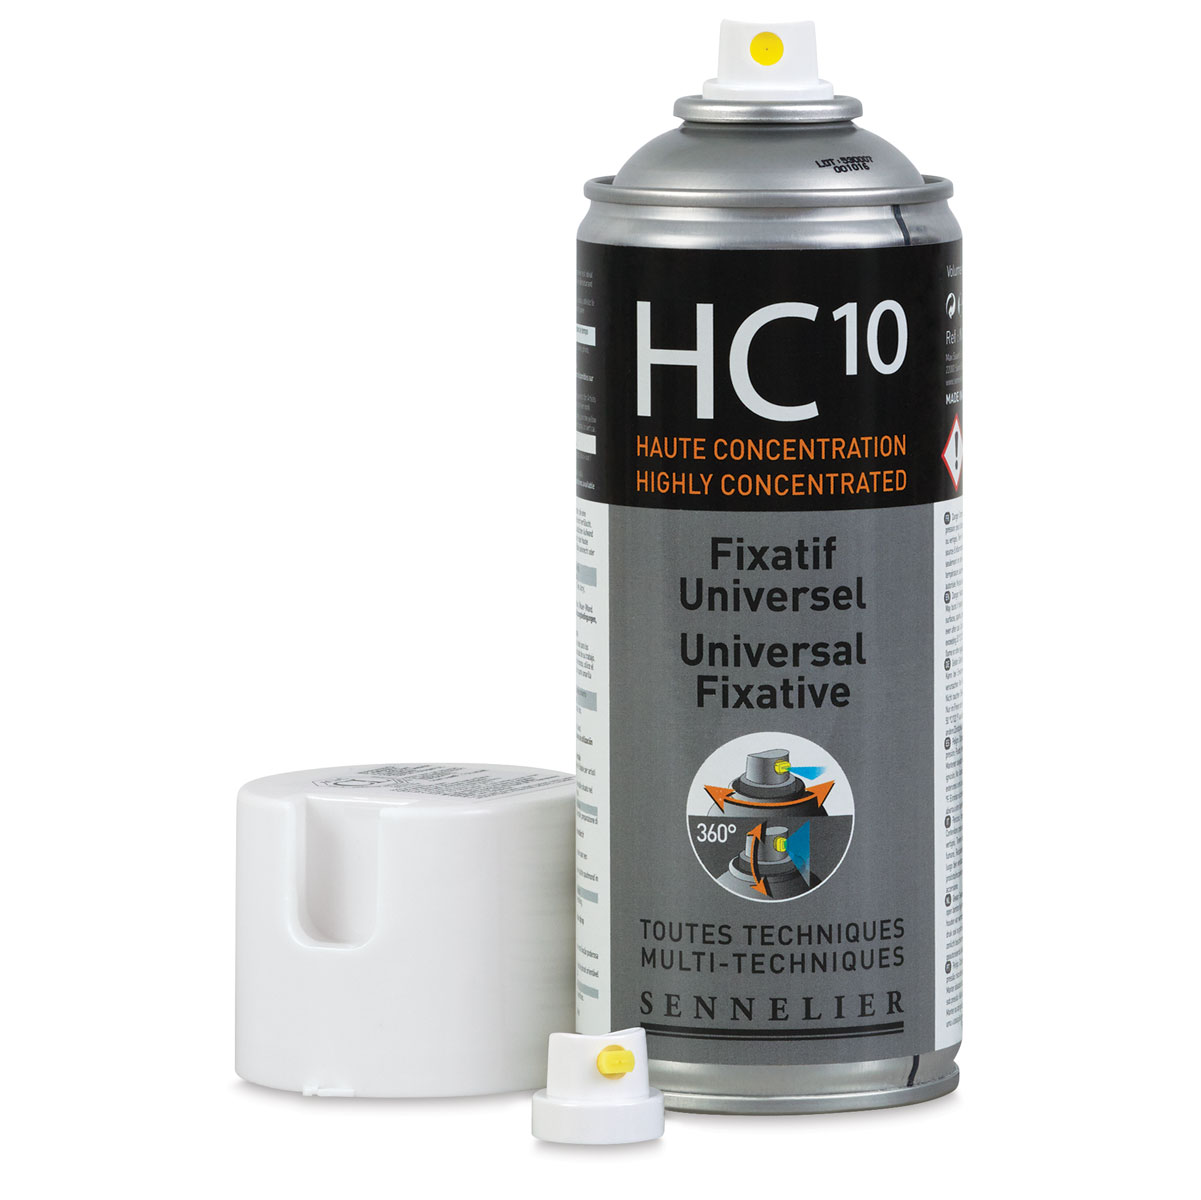 Sennelier Delacroix Spray Fixative for Pencils and Charcoals